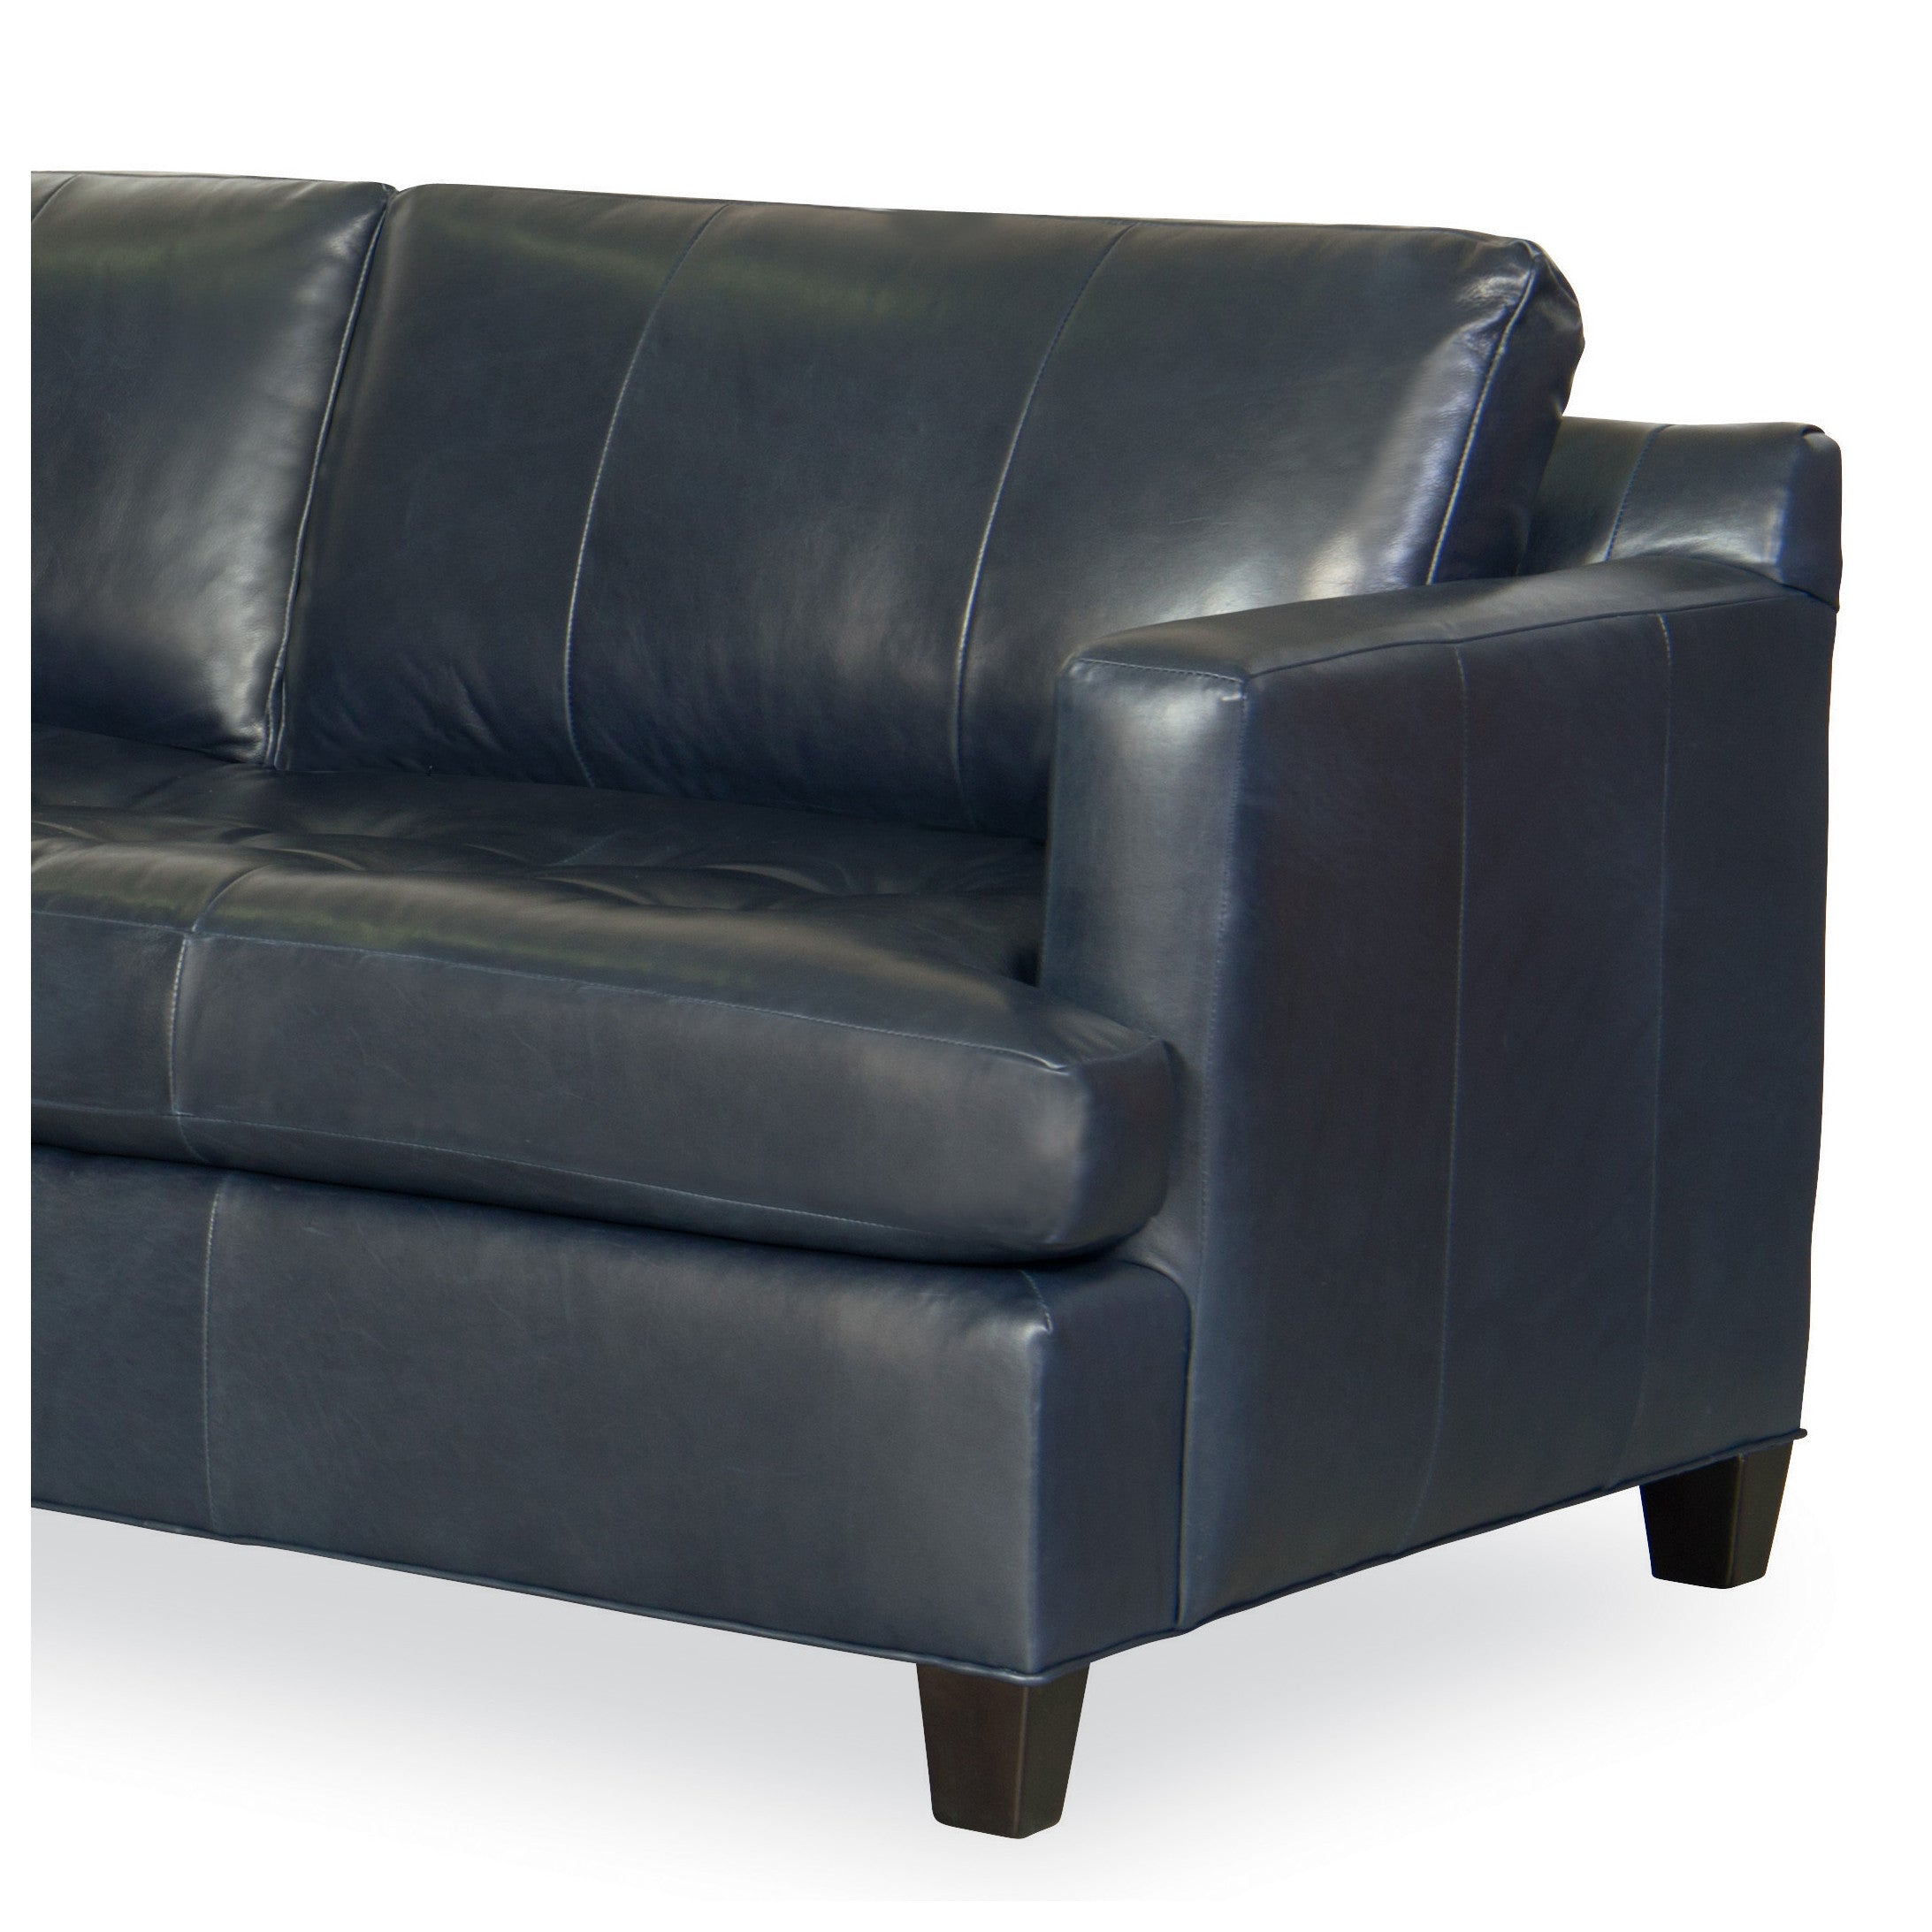 Taylor Sectional Series with Buttons